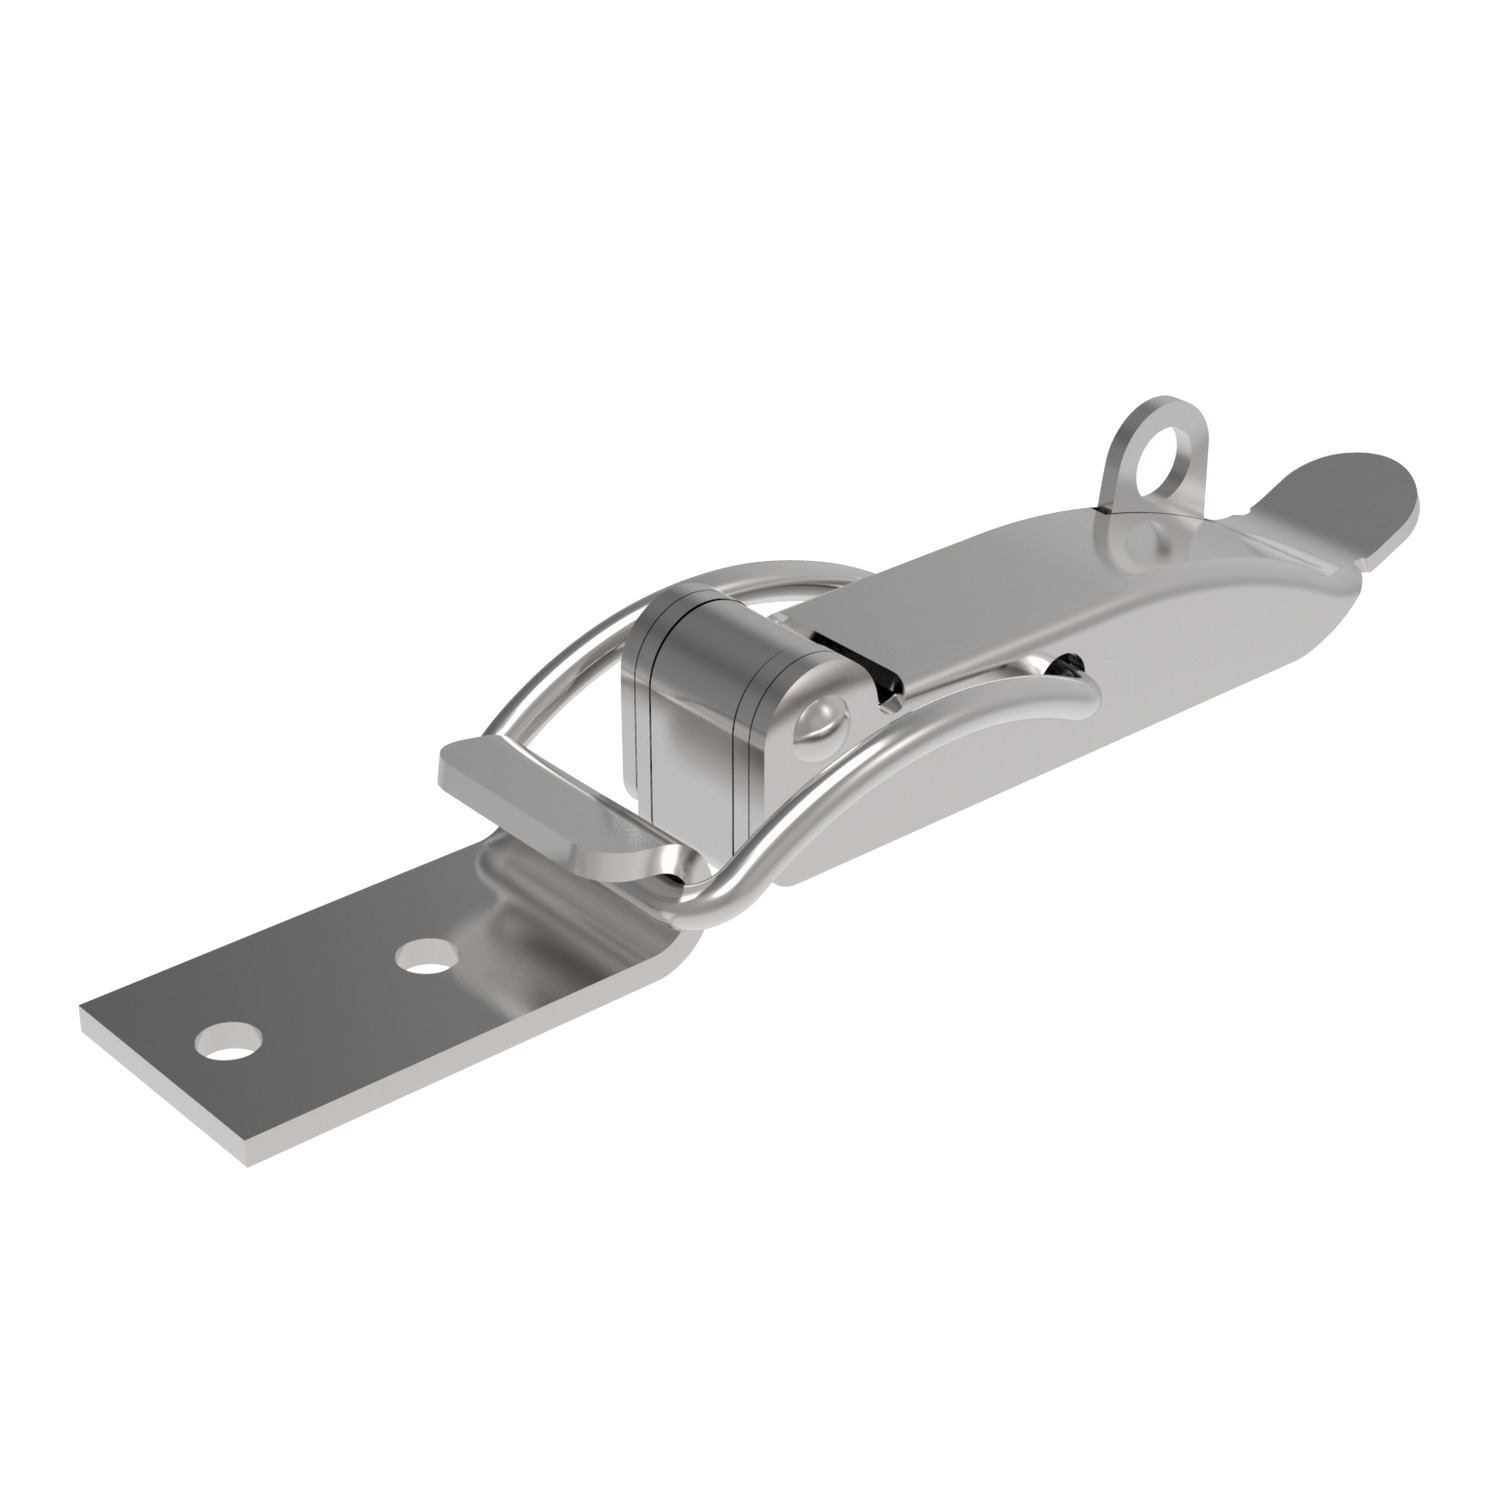 Toggle Latches Made from Steel or Stainless Steel, adjustable toggle latch with padlock shackle. Supplied with counter strike.